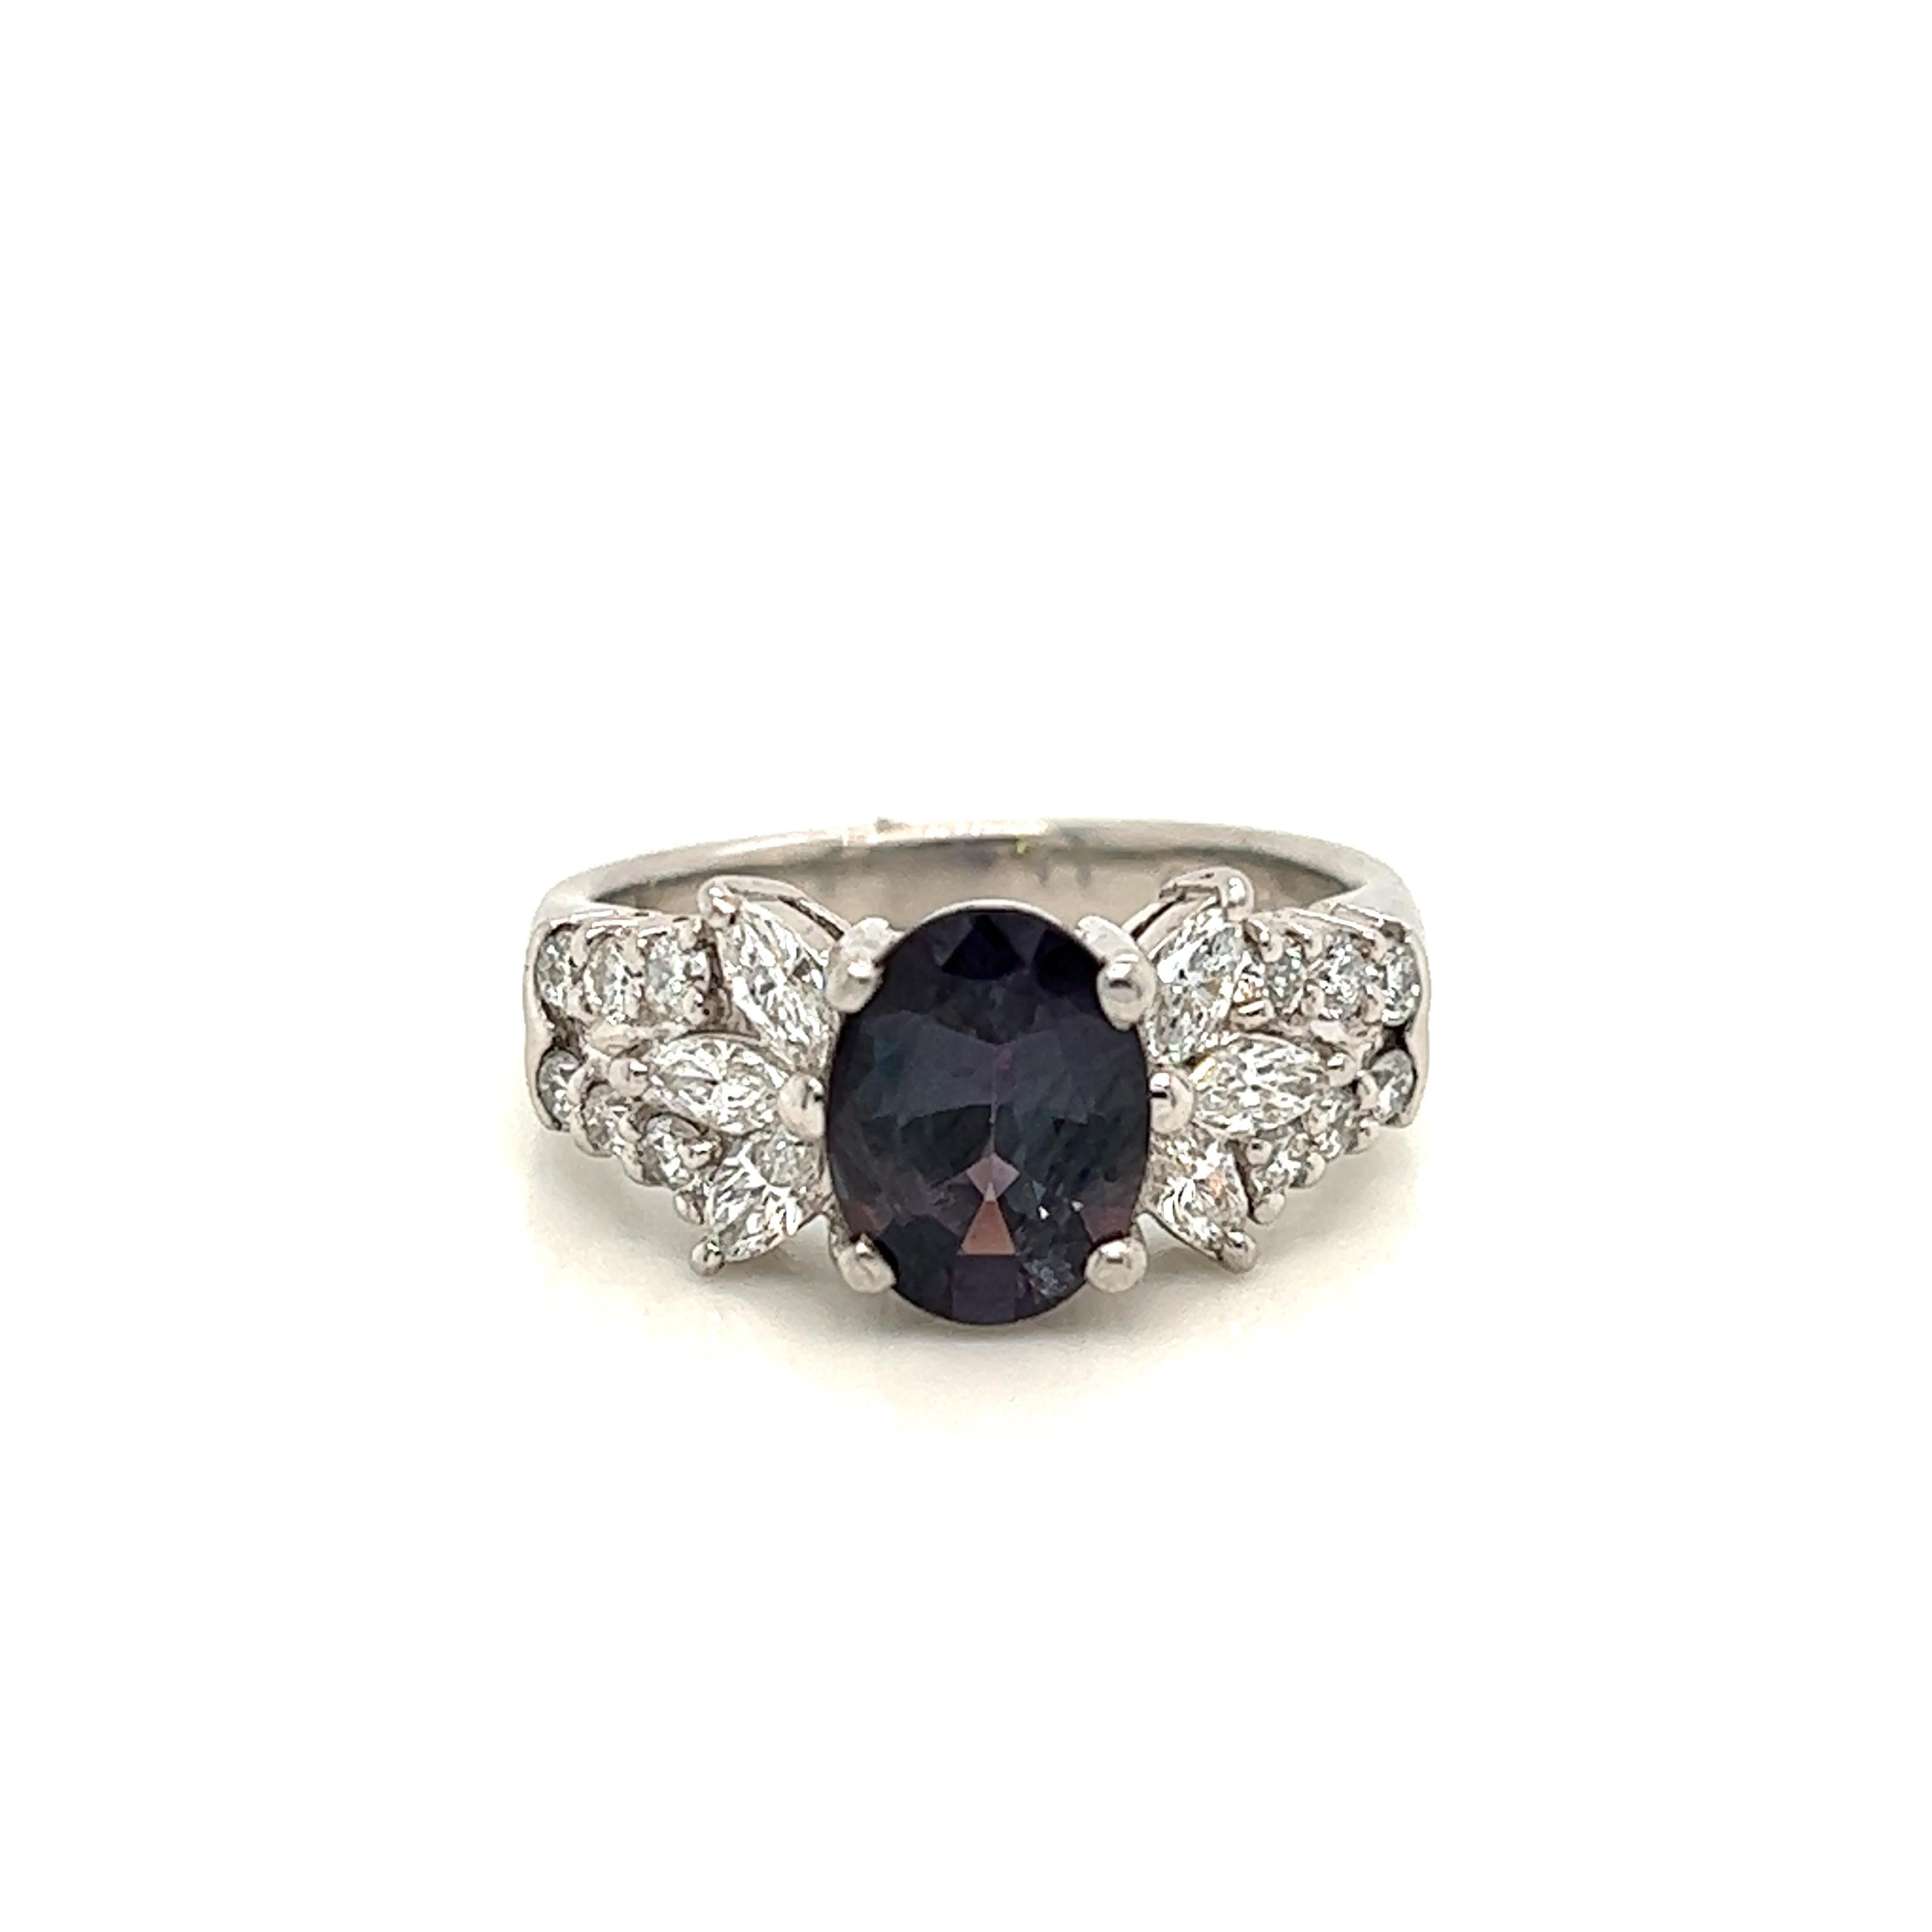 This is a gorgeous natural AAA quality oval Alexandrite surrounded by dainty diamonds that is set in a cocktail platinum setting. This ring features a natural 1.62 carat oval alexandrite that is certified by the Gemological Institute of America